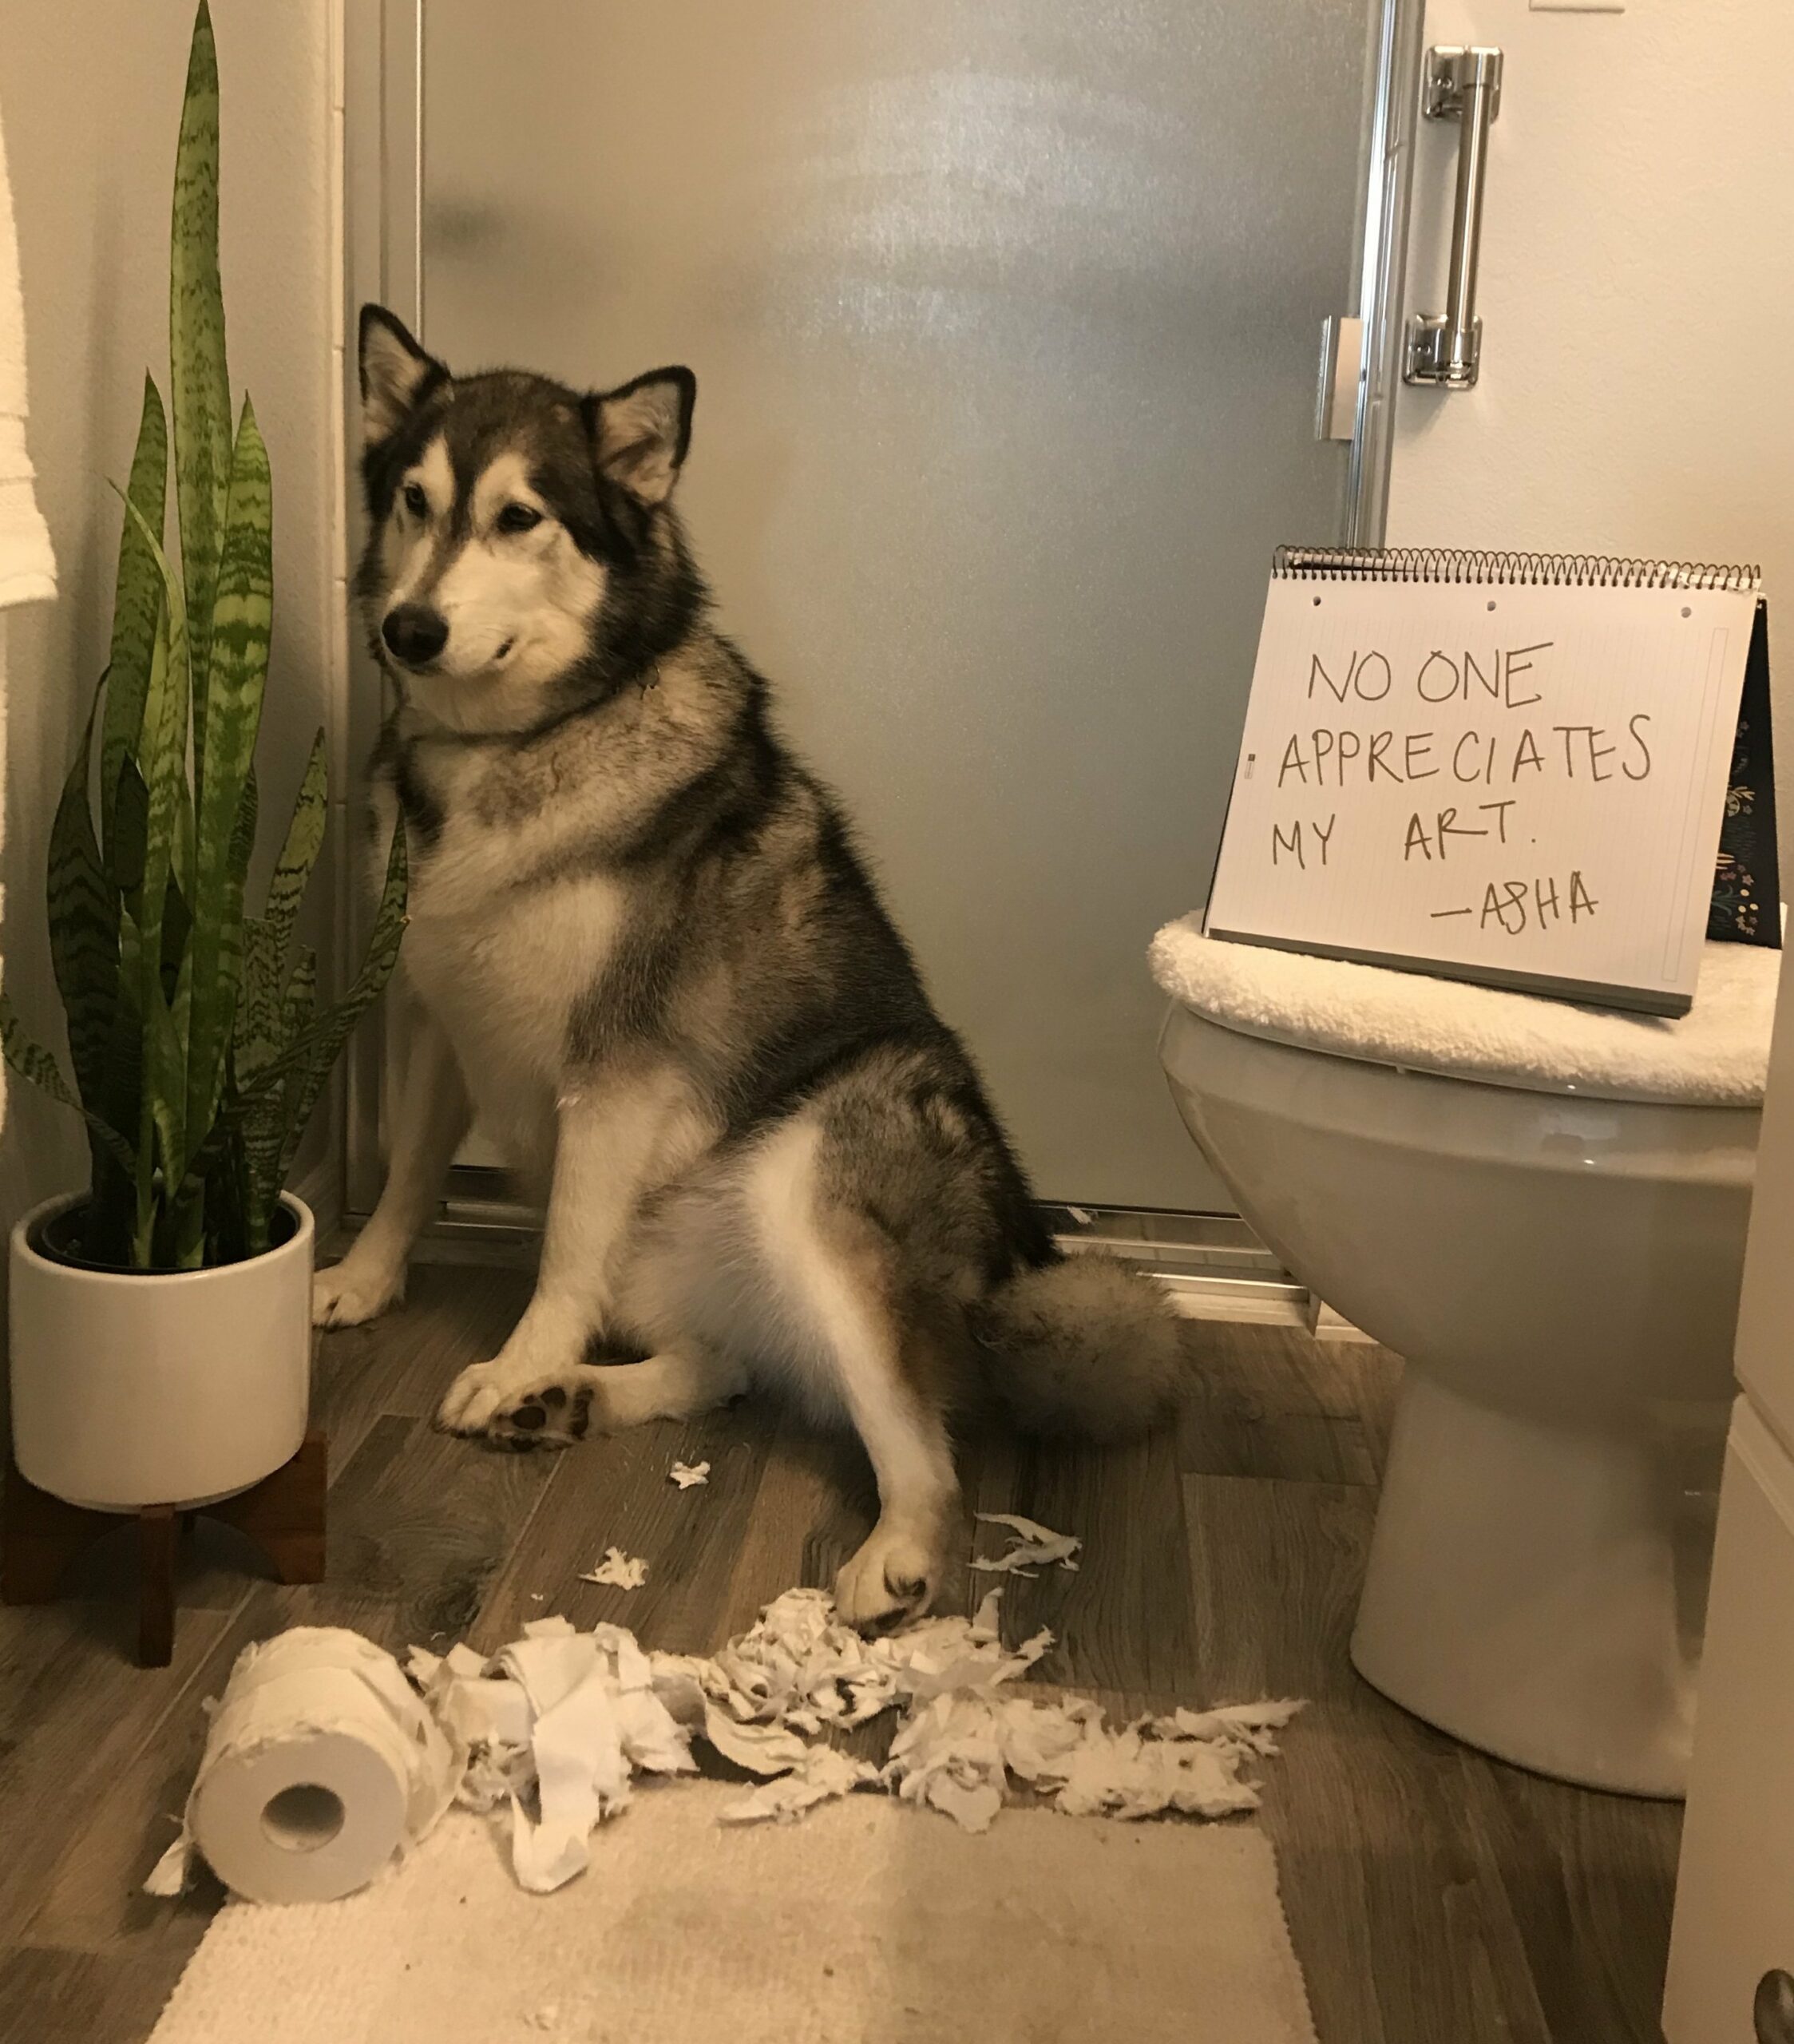 dog sitting with destroyed toilet paper roll next to a sign that says "No one appreciates my art. -Asha"